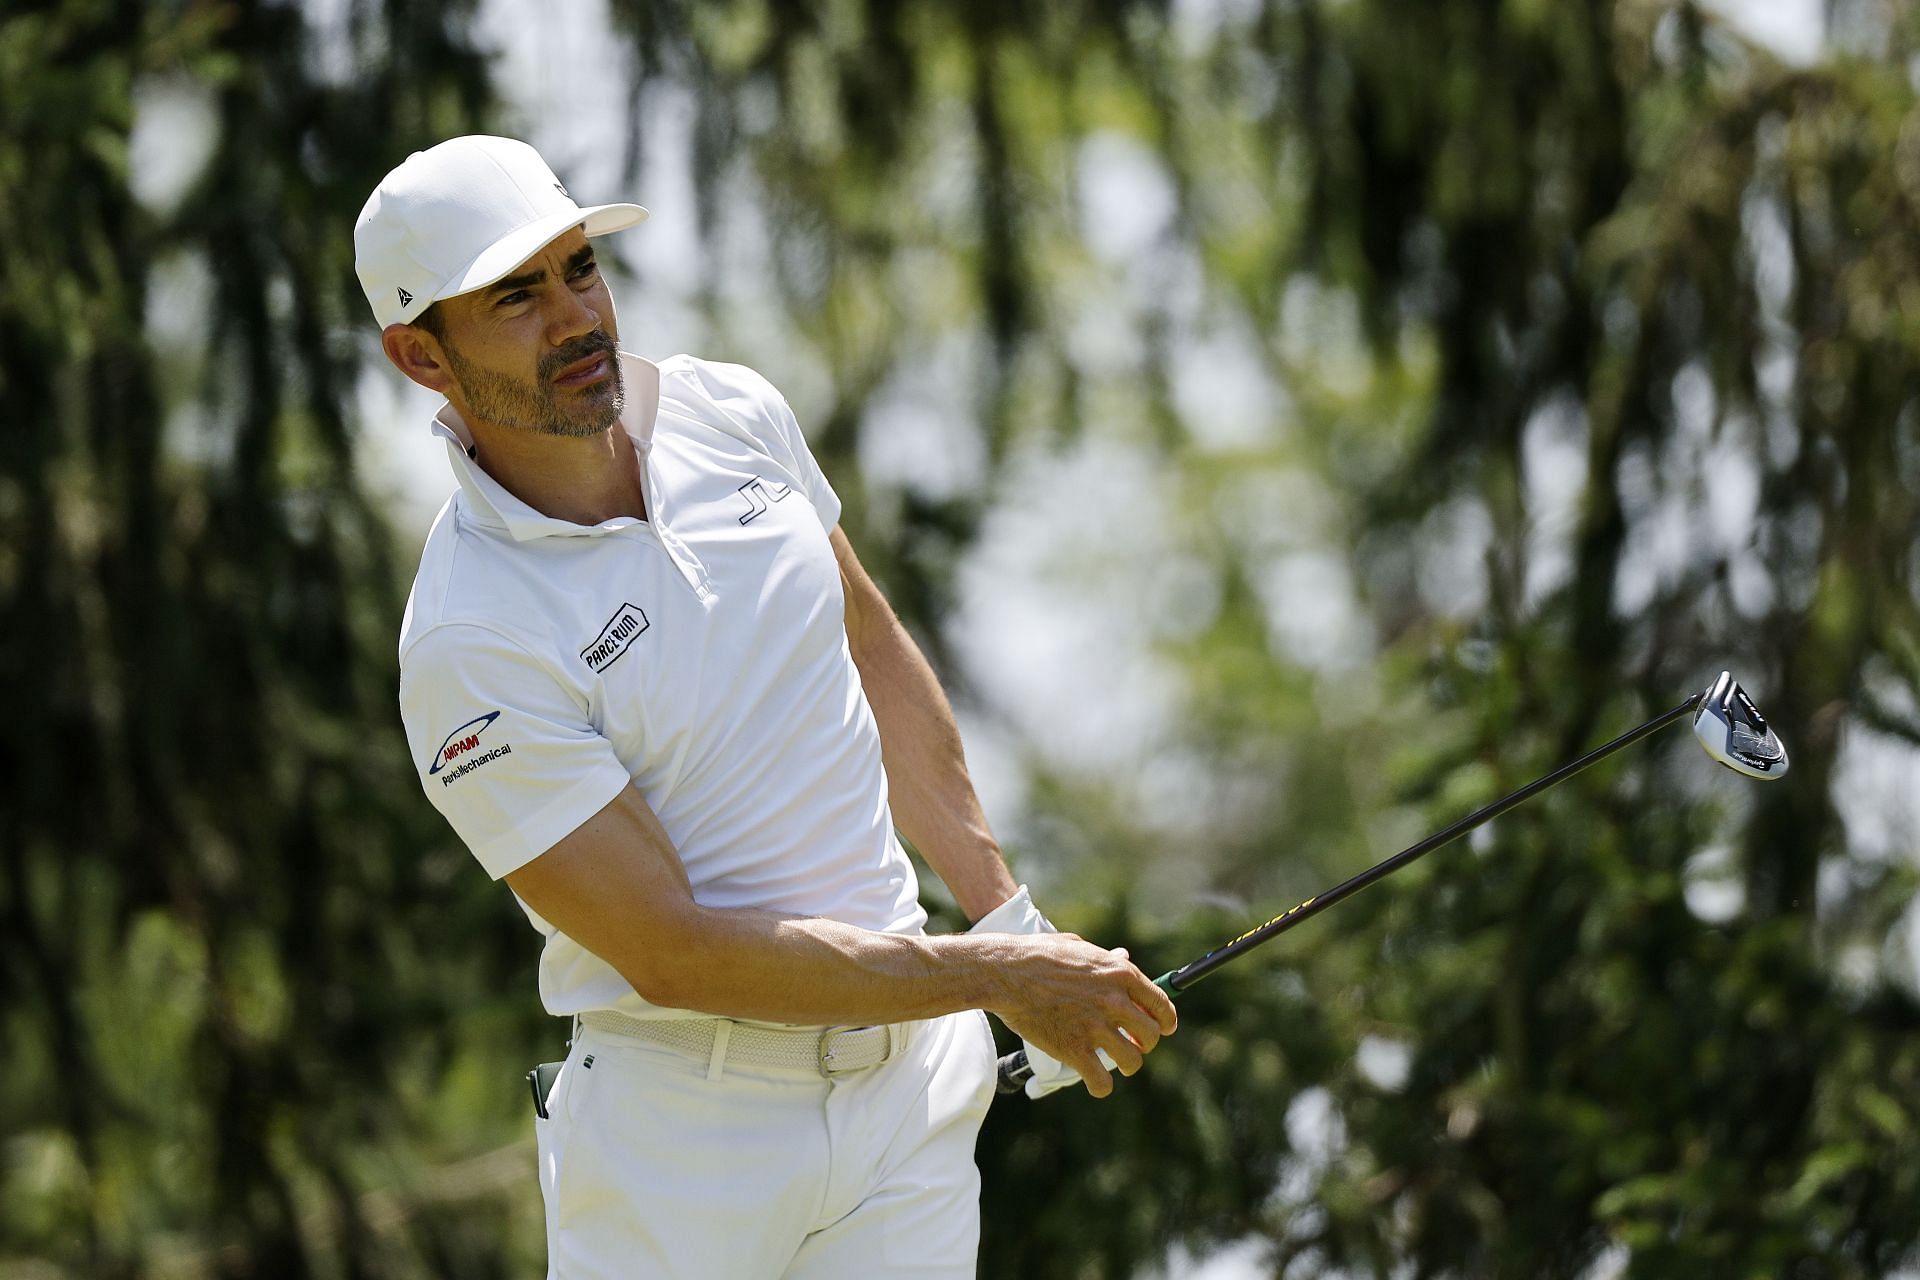 Camilo Villegas at the Price Cutter Charity Championship (Image via Getty)